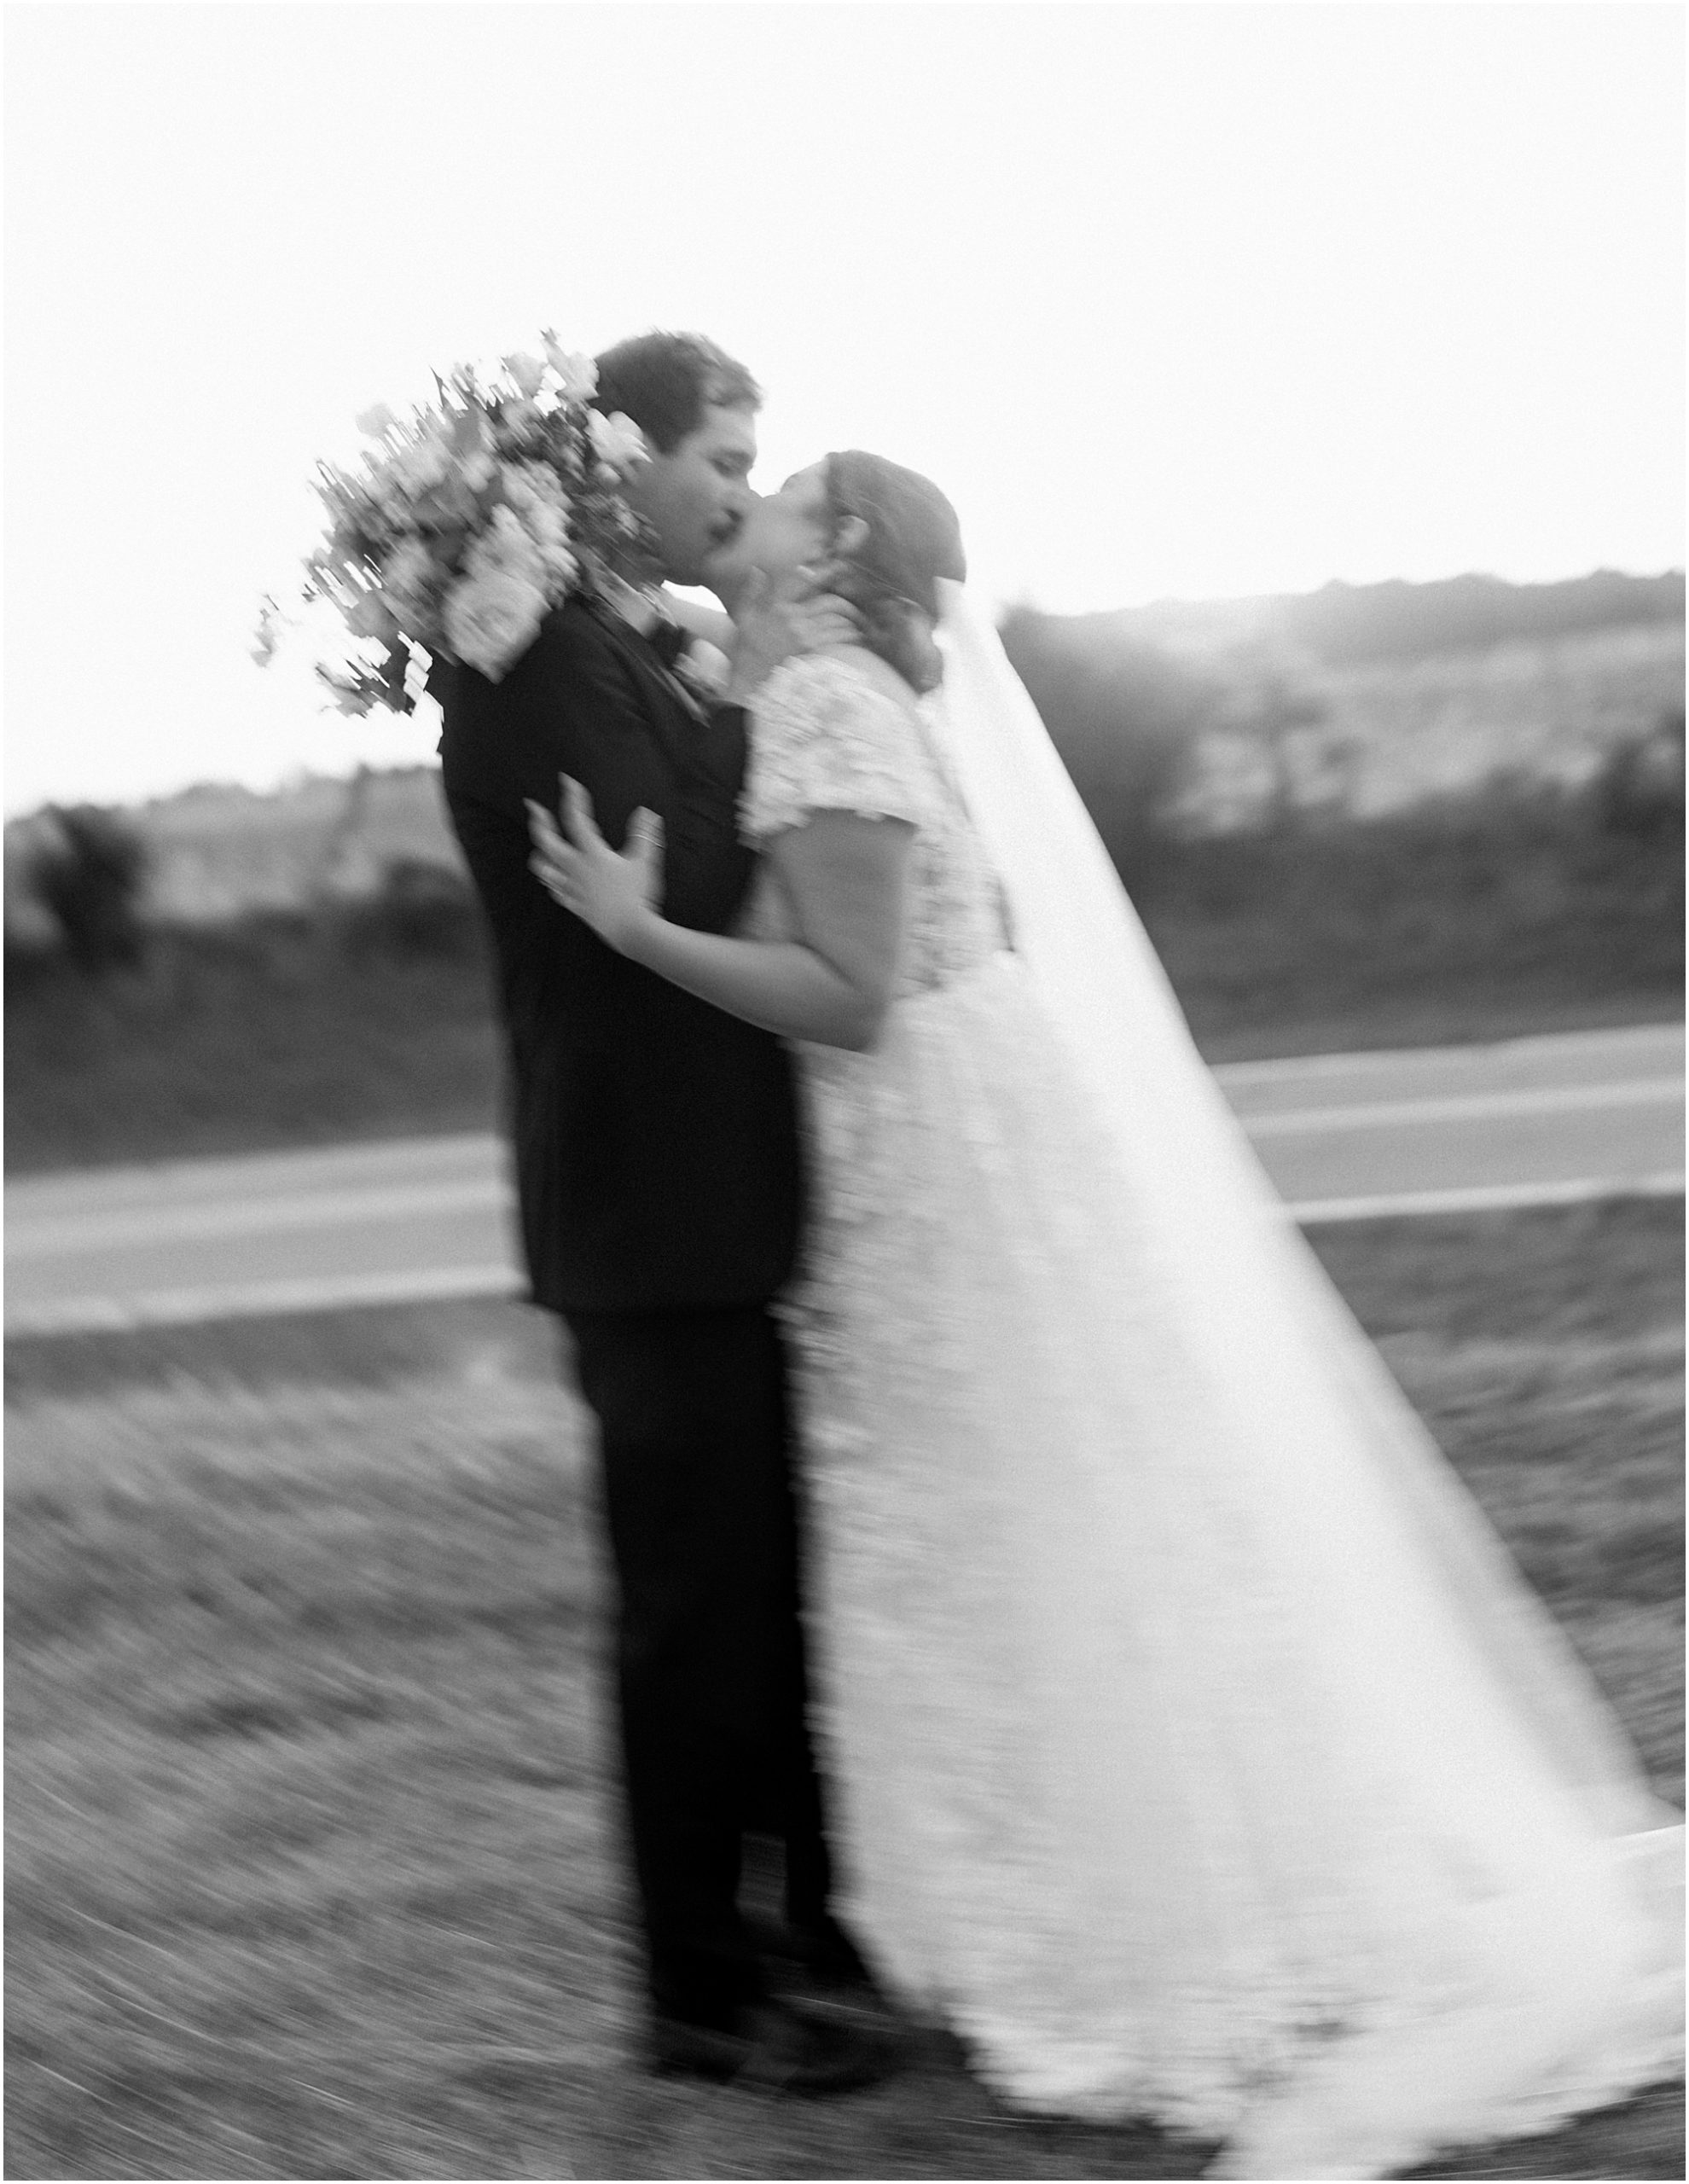 Bride and groom portraits in black and white. Bride and groom blurry.